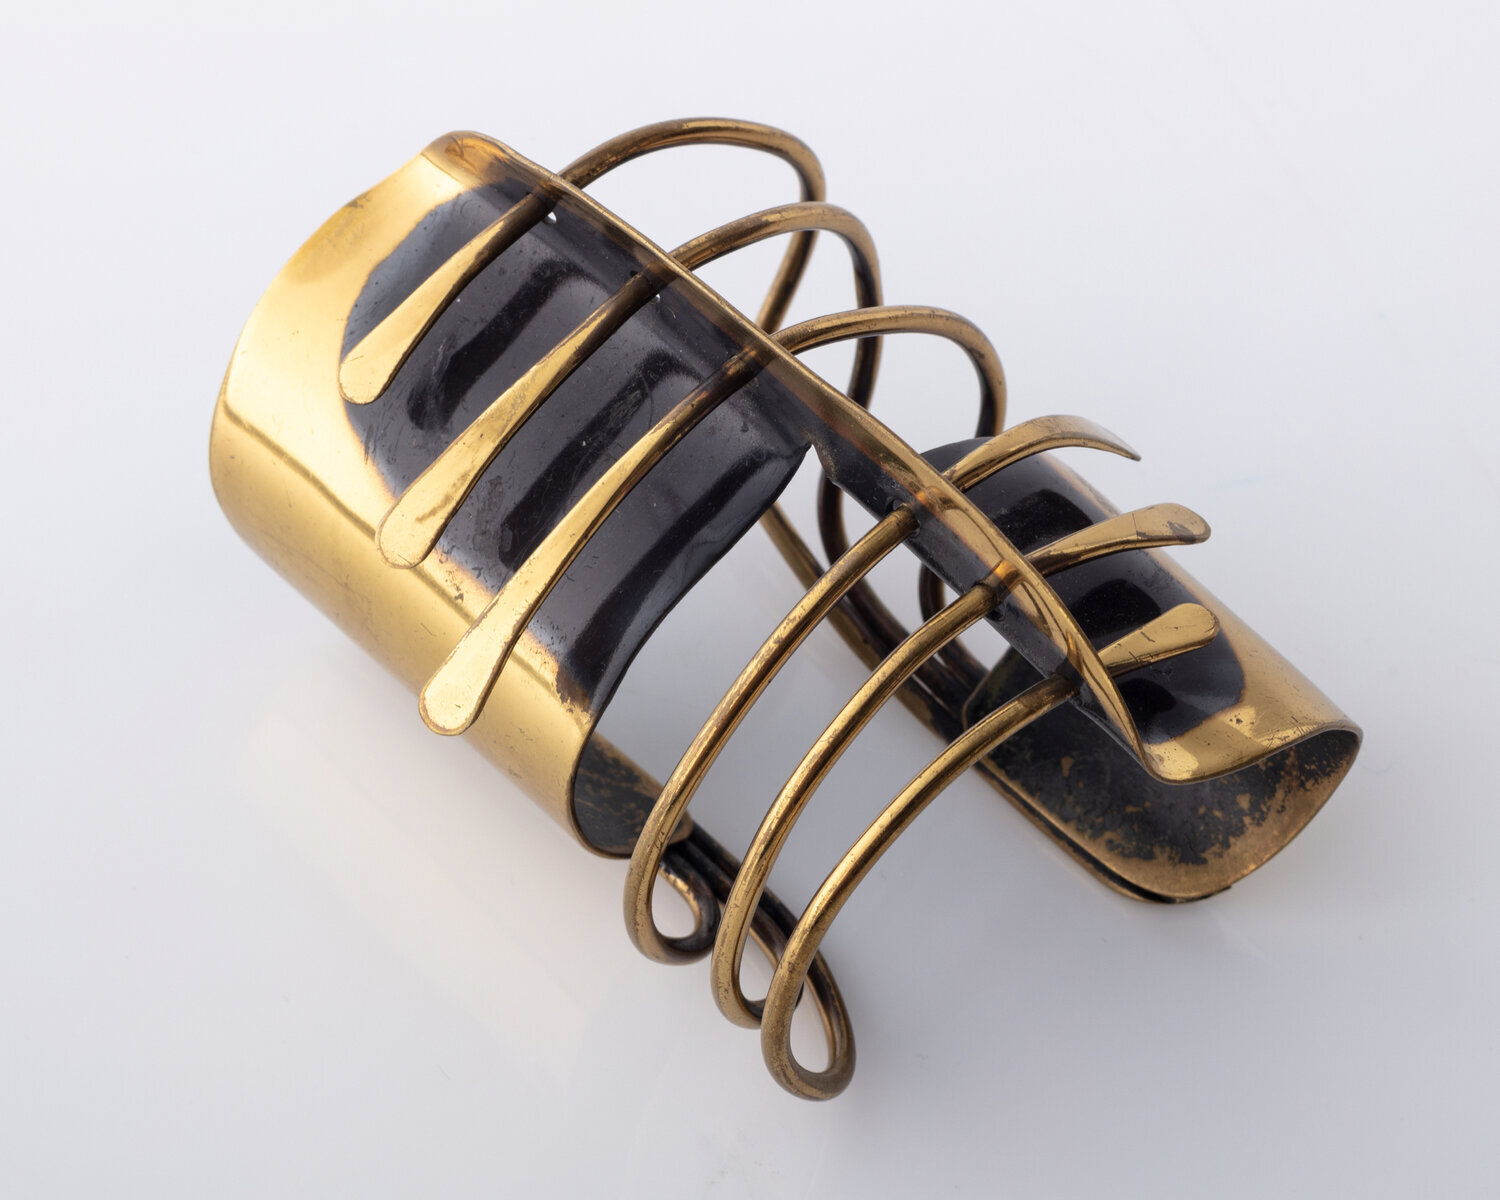  Modern Cuff bracelet in brass and copper. Designed and made by Art Smith, USA, 1946-82. 